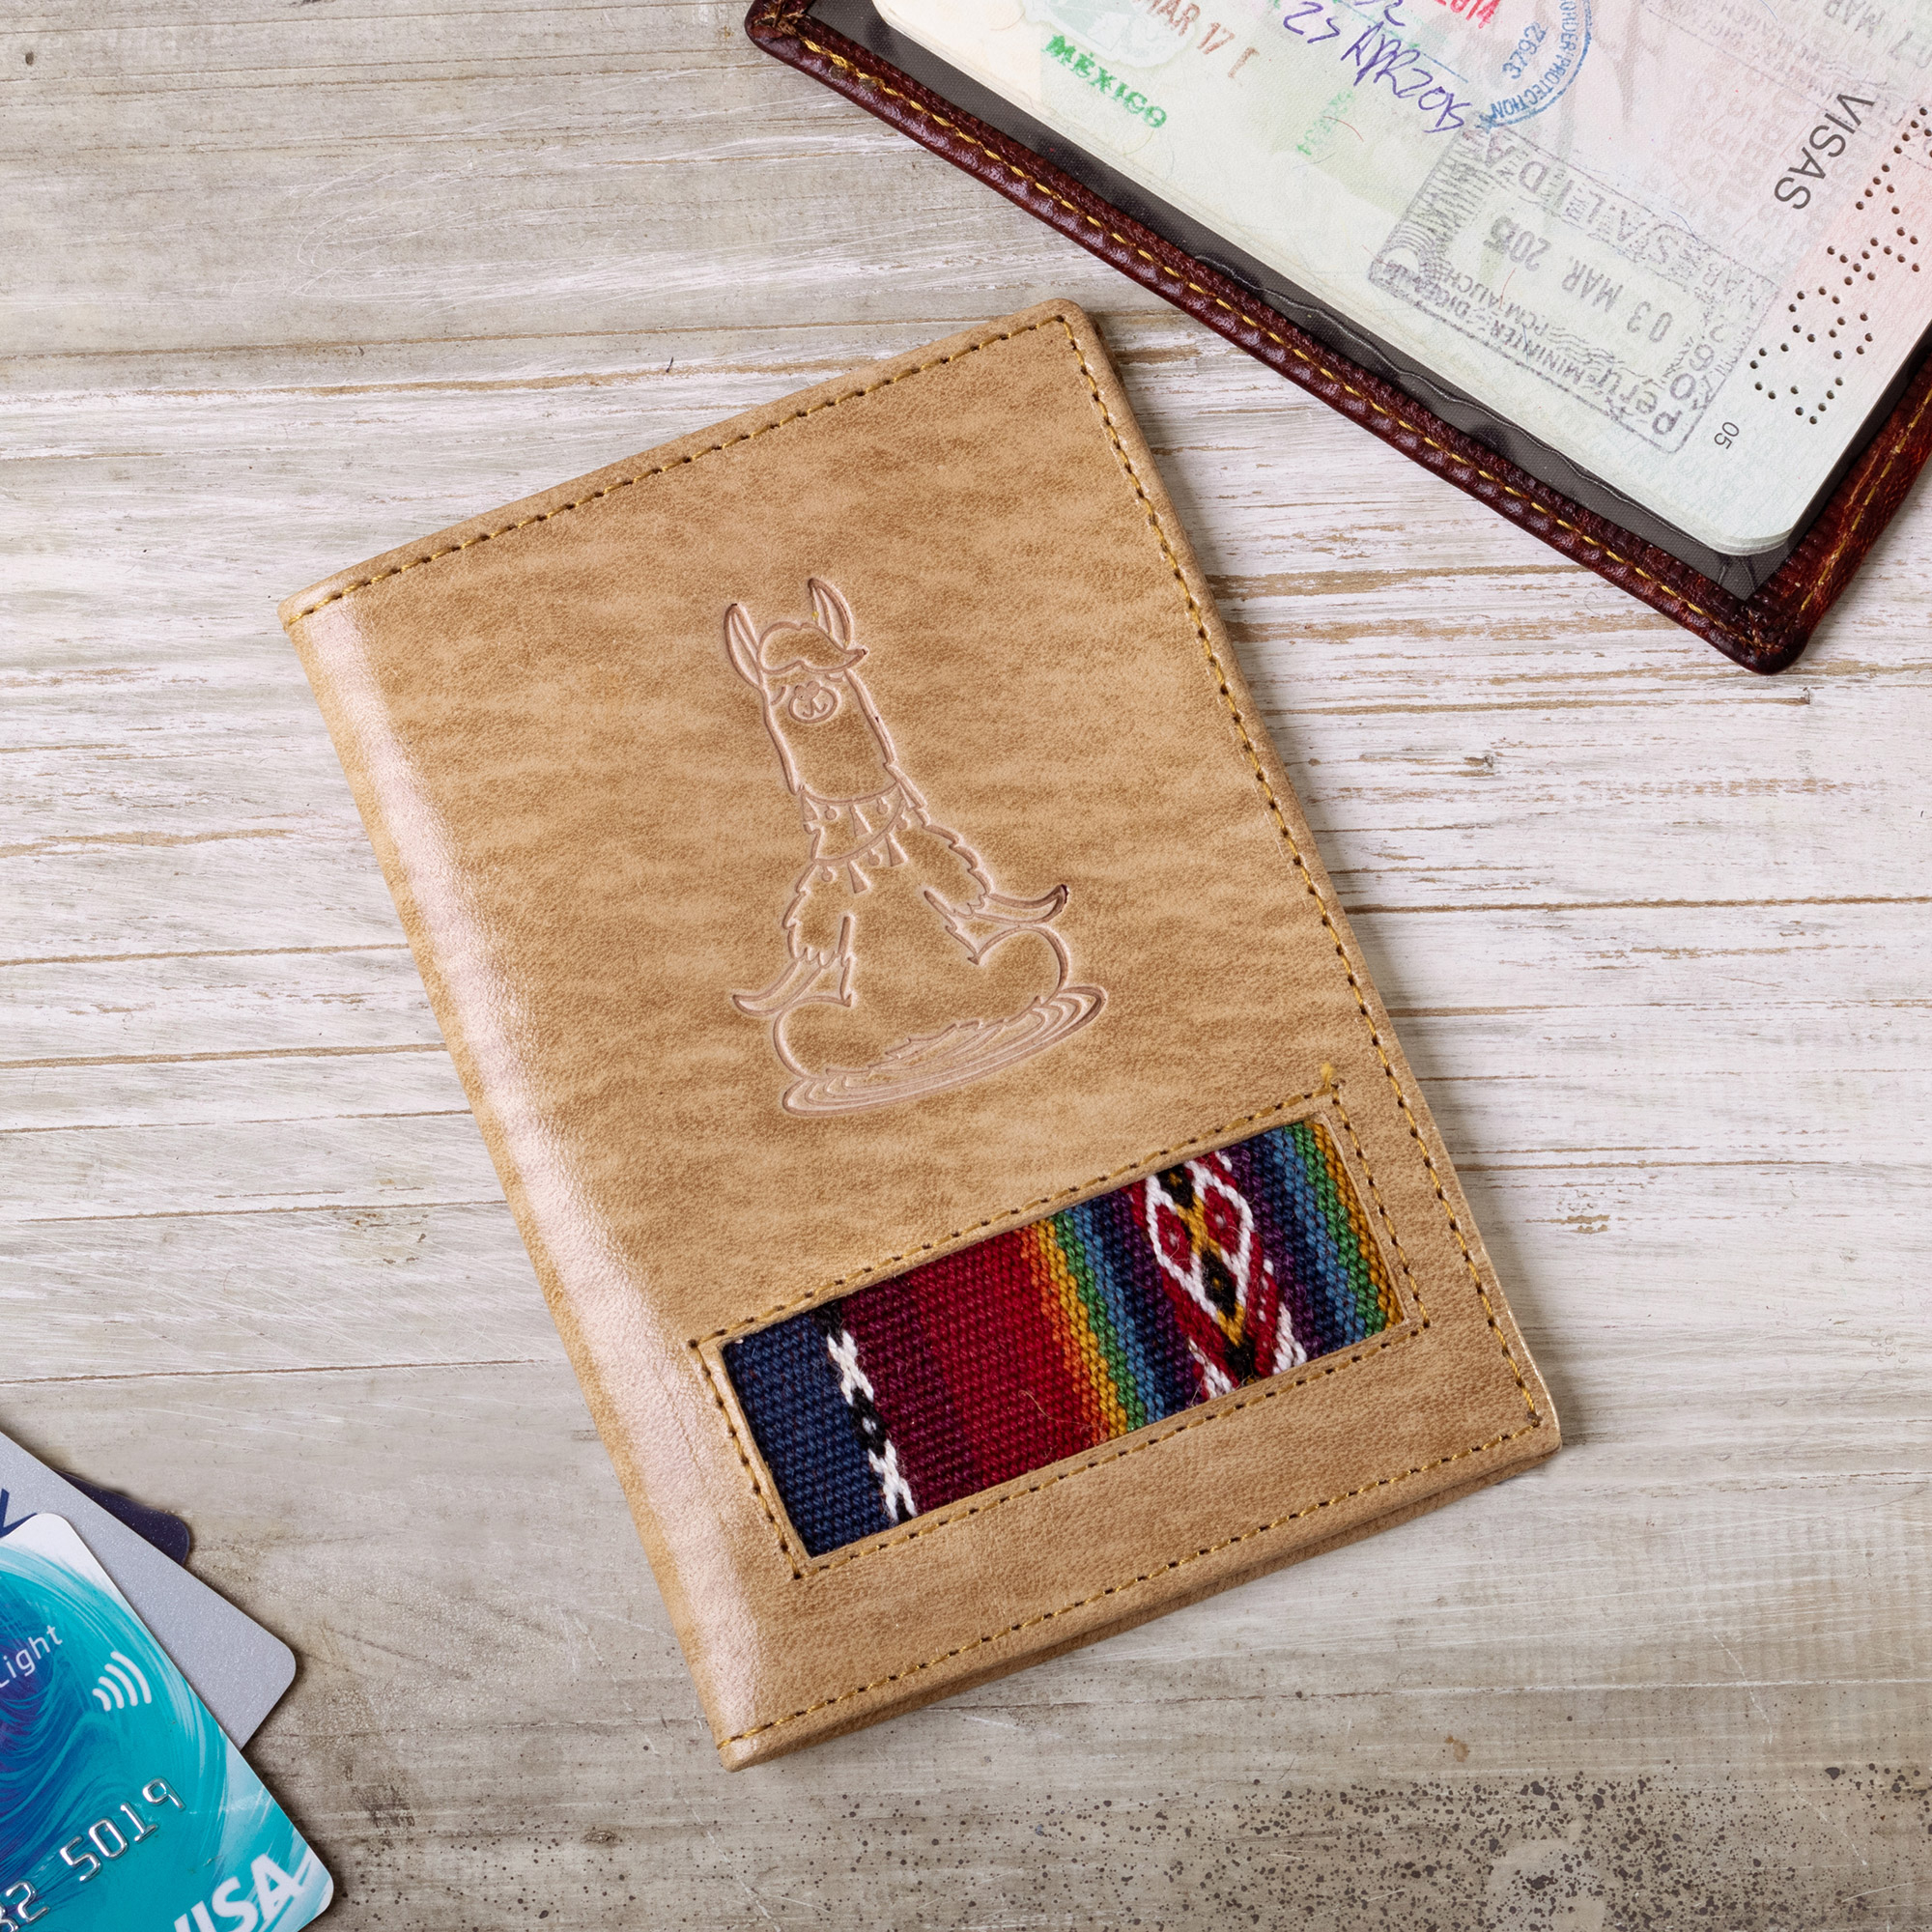 Handcrafted Llama Leather Passport Cover in Dark Brown - Thoughtful Llama